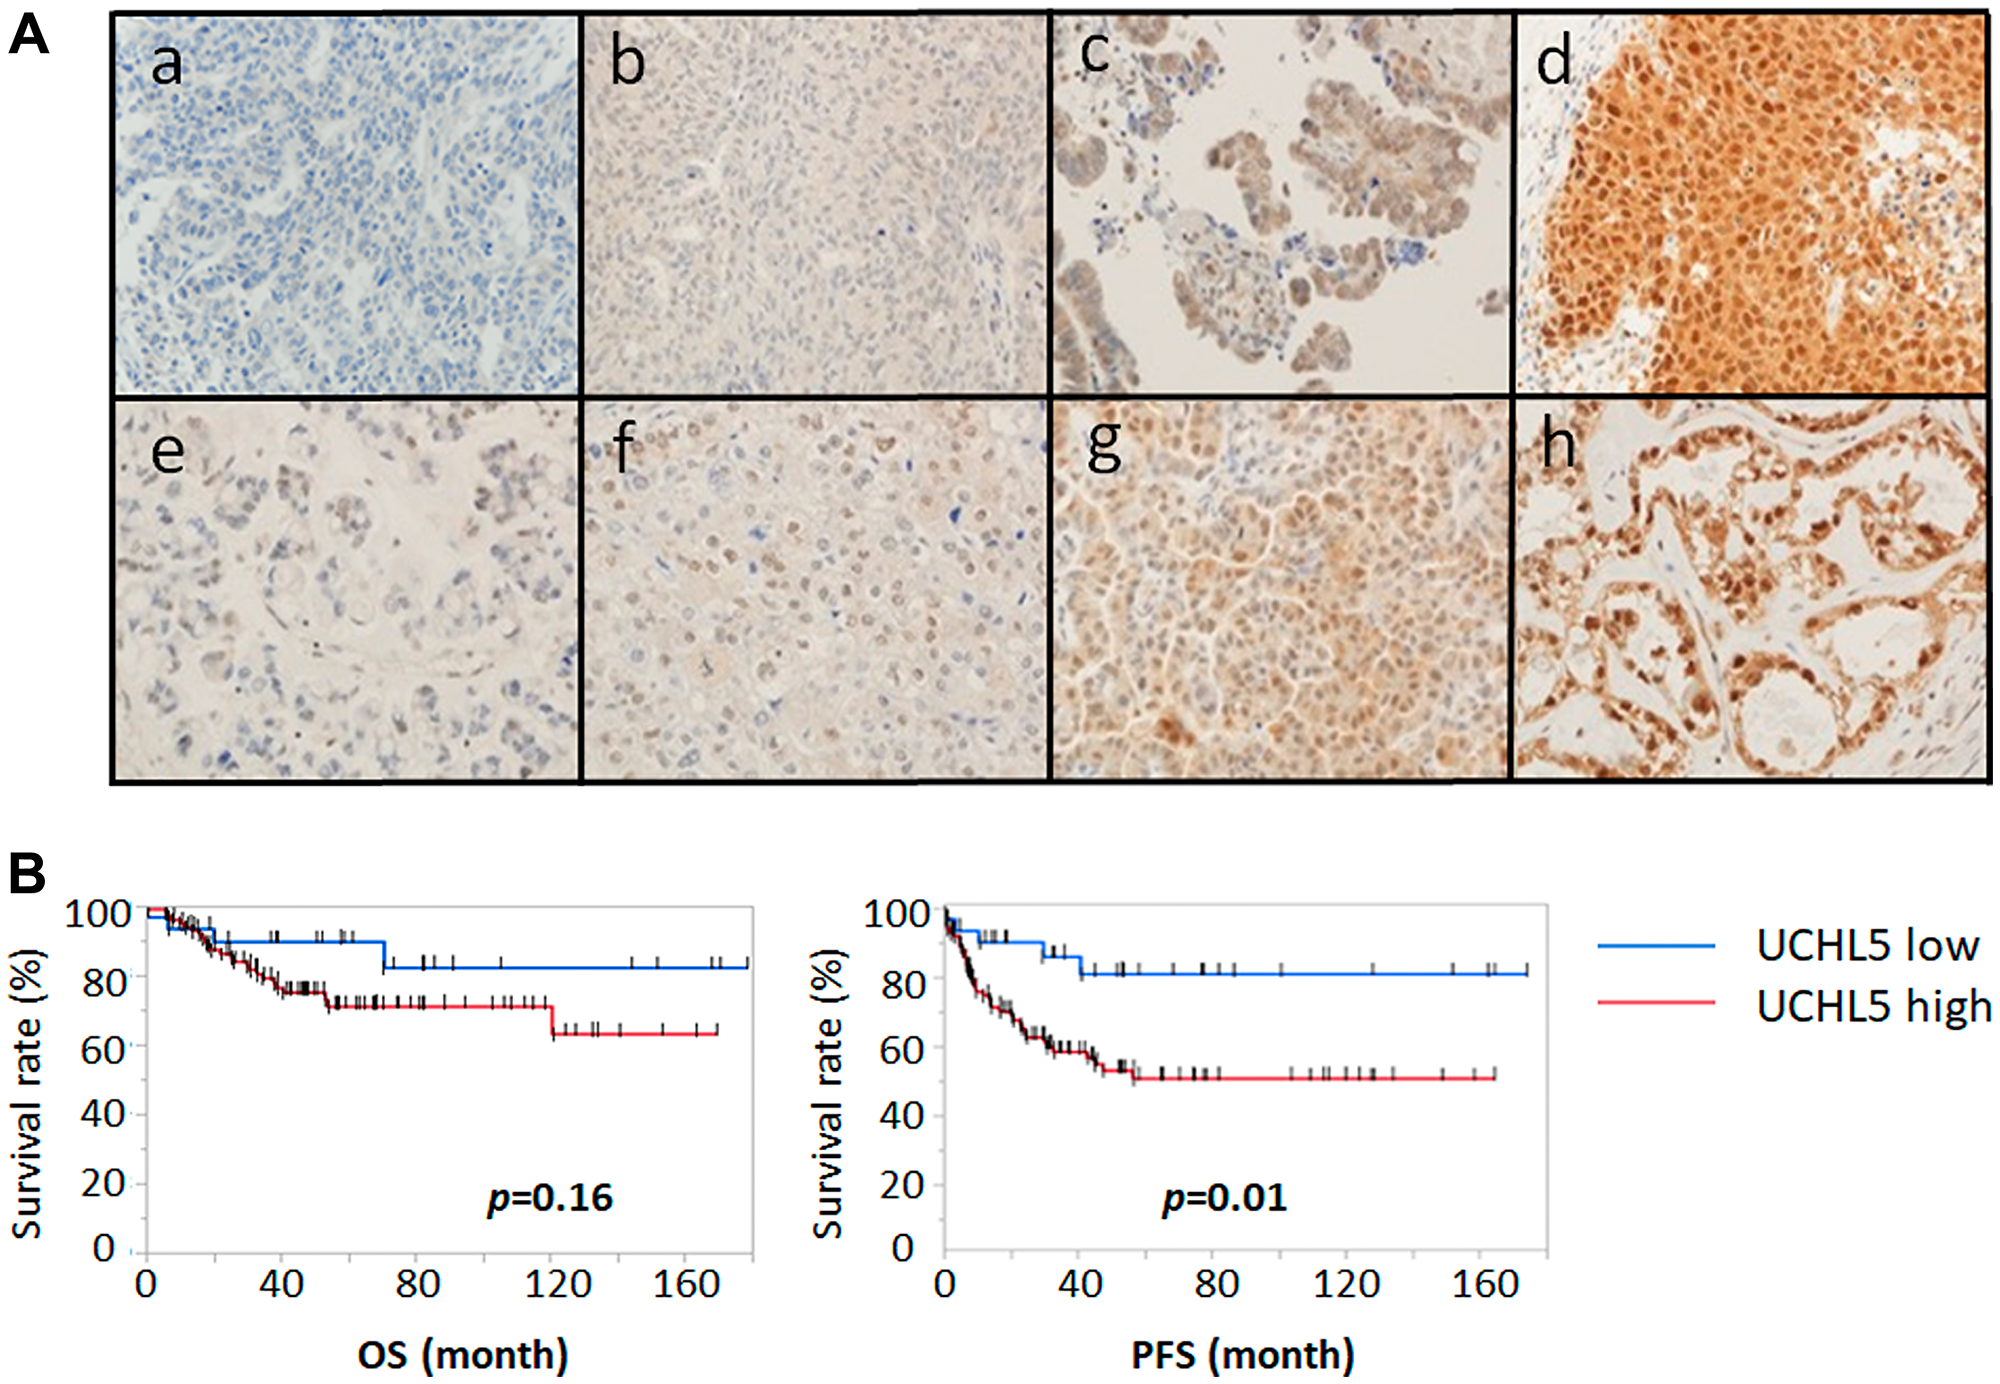 Immunohistochemical staining pattern of UCHL5 in ovarian cancer.